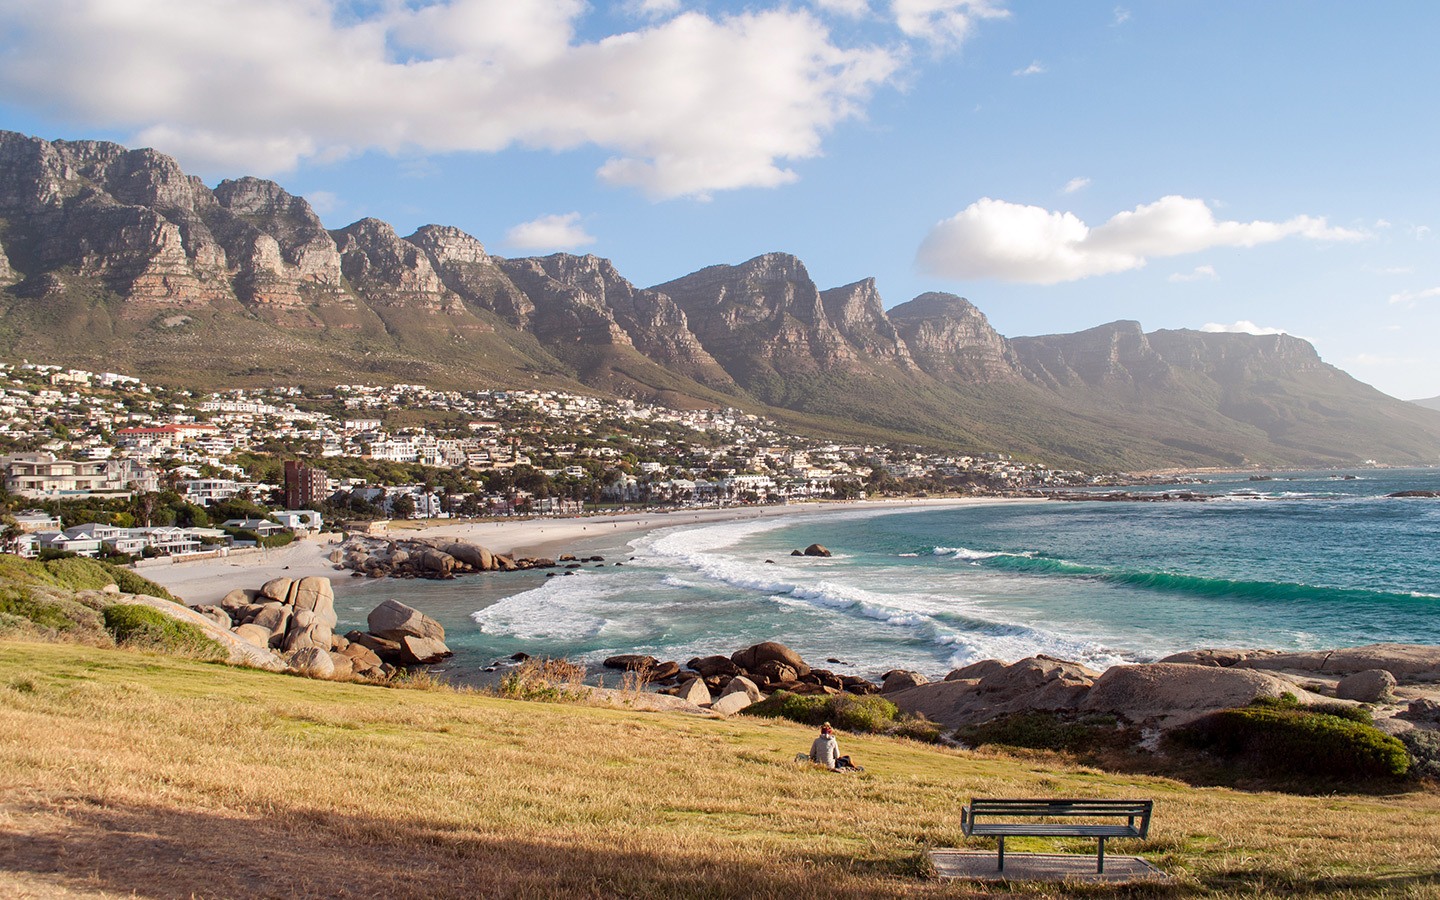 Visiting Cape Town on a budget